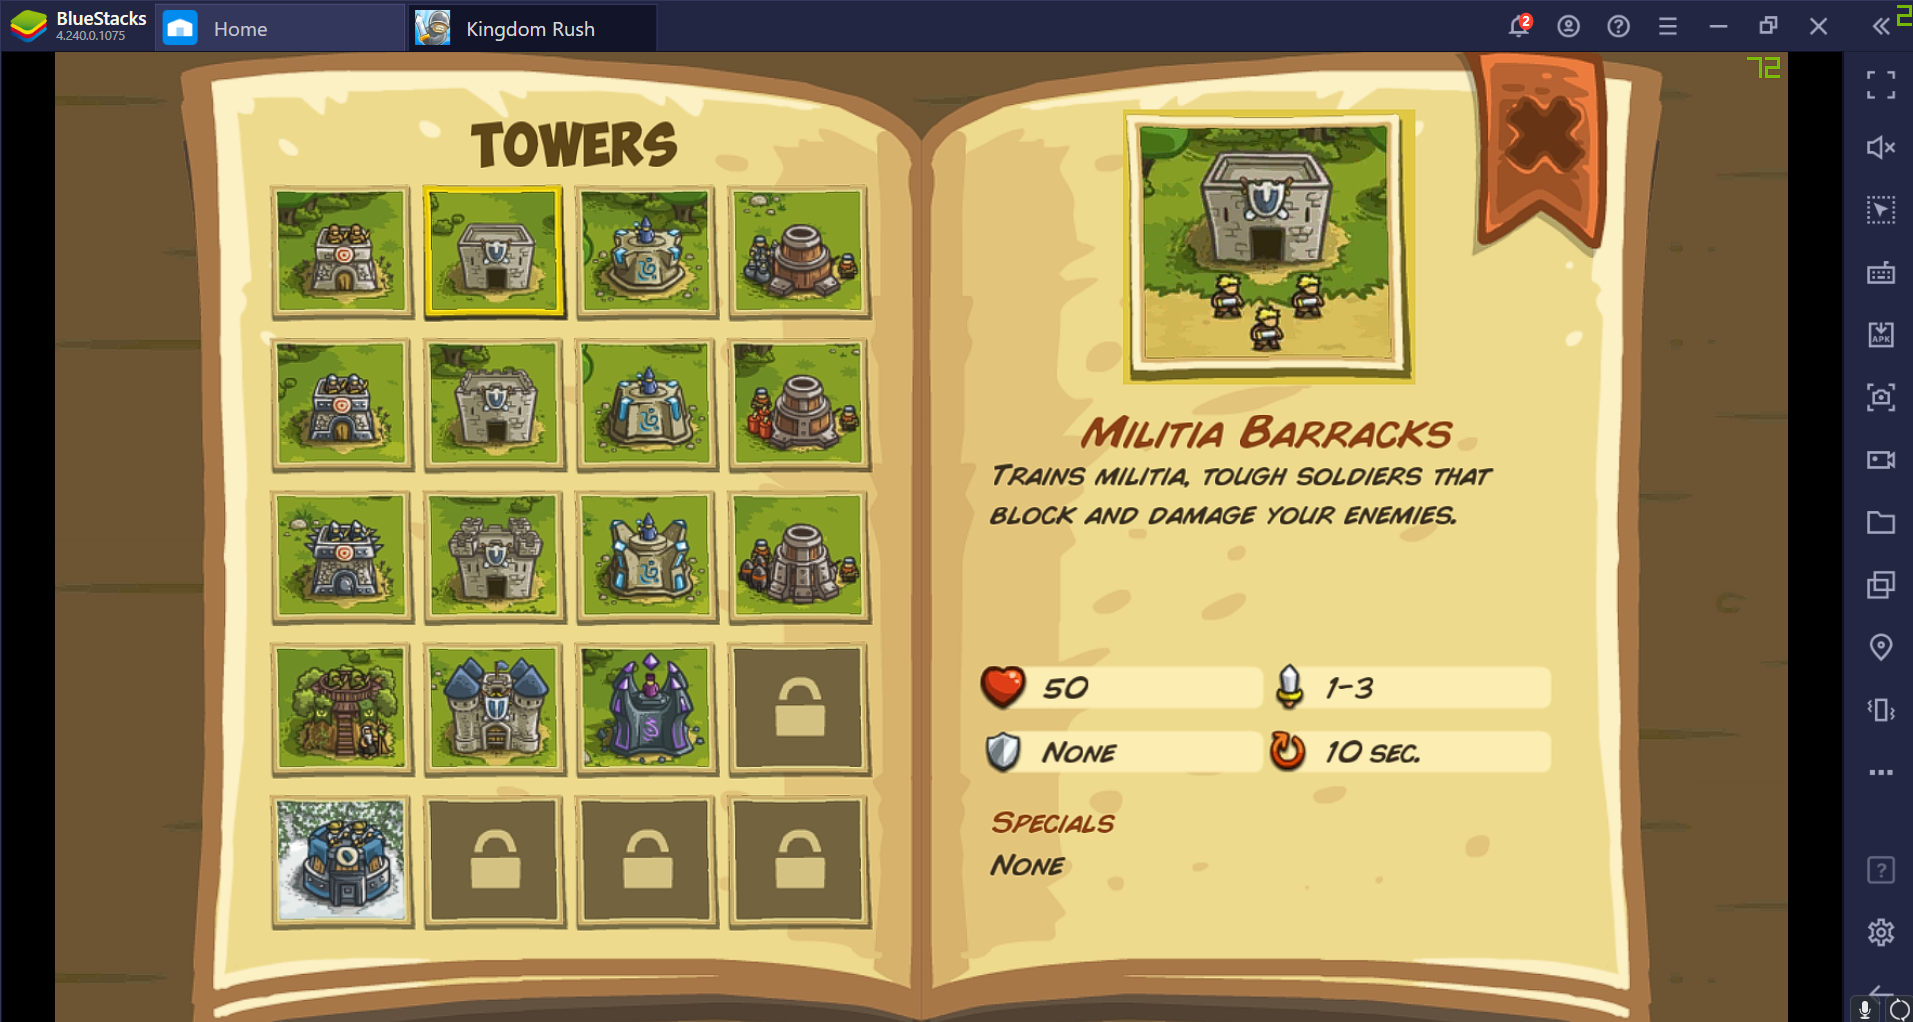 Tips and Tricks to Get Better at Kingdom Rush on PC